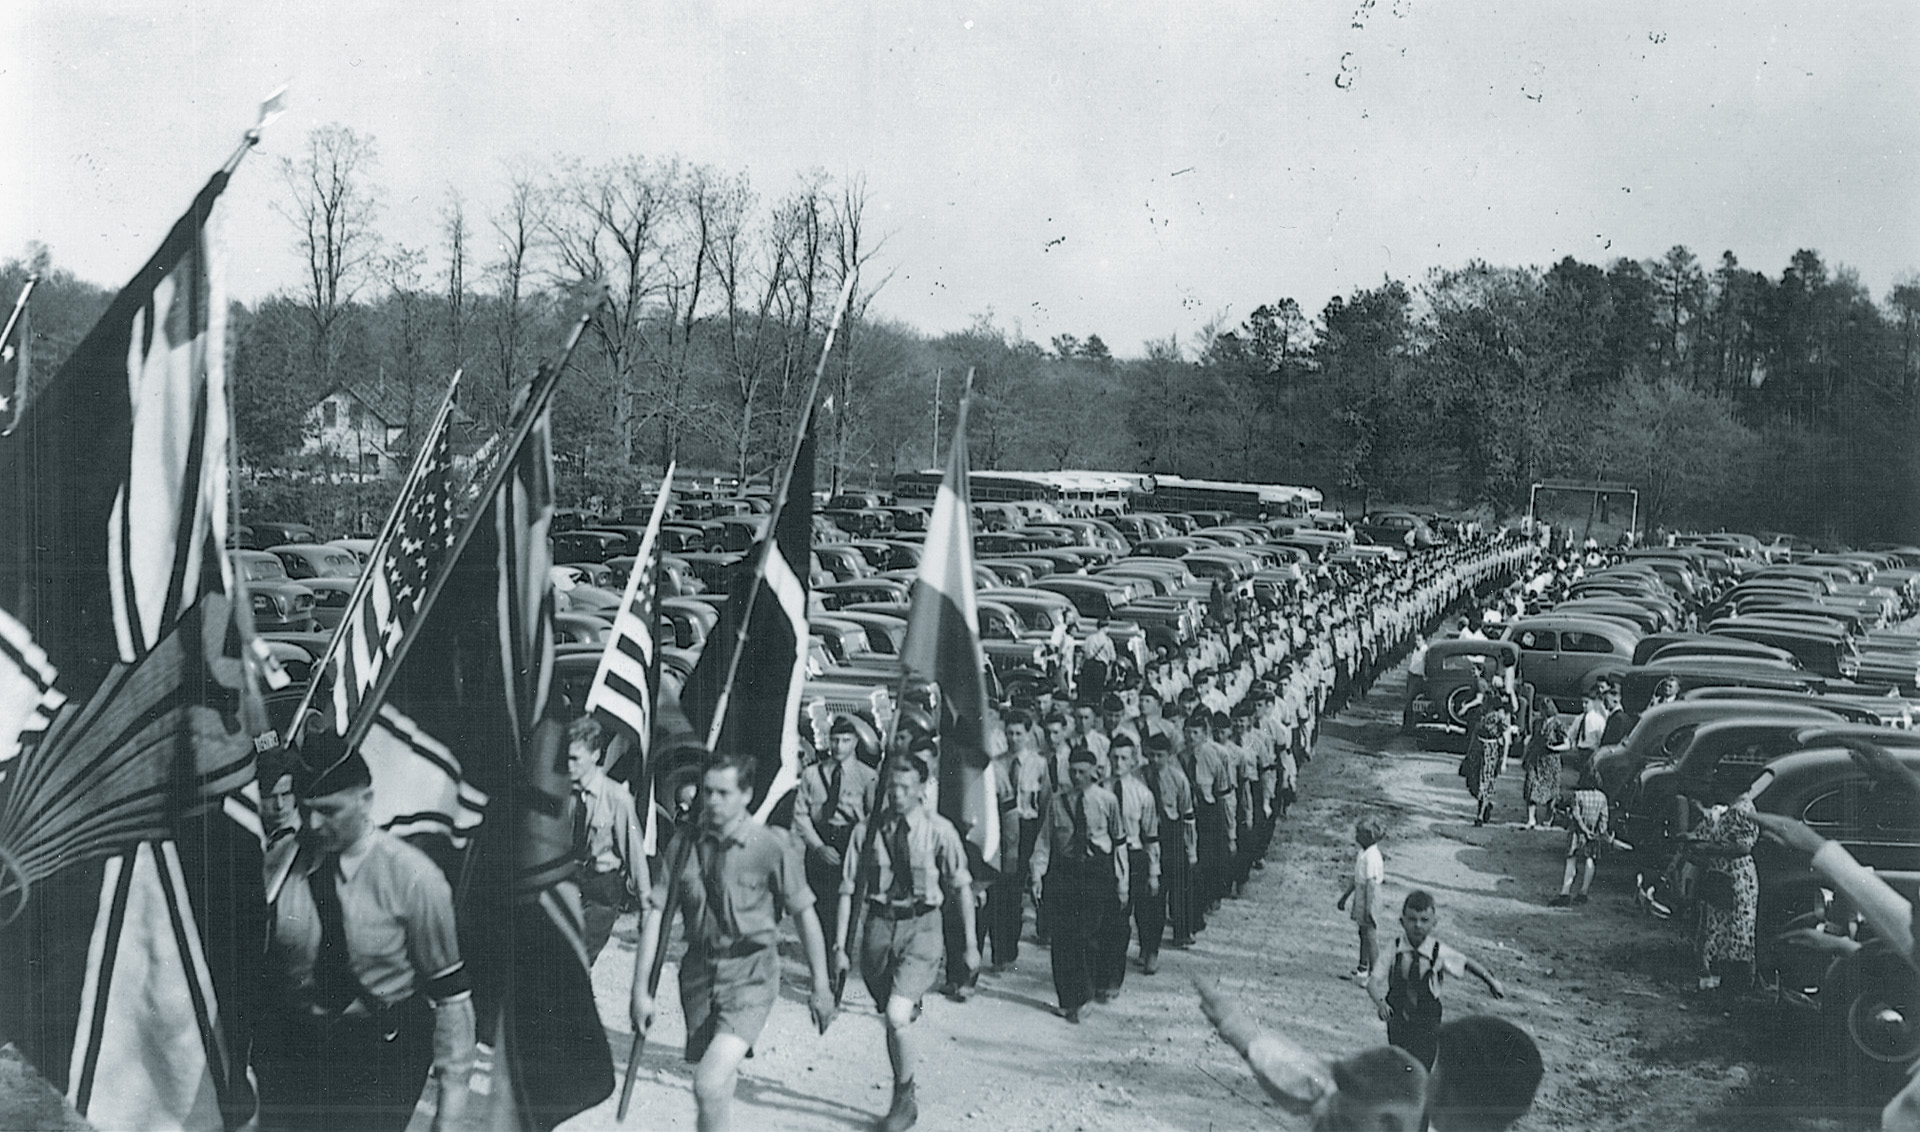 Young Hans Pogel (center) carries a flag during a procession to open Camp Siegfried in the summer of 1939. Numerous offshoots of the German-American Bund sponsored camps for the indoctrination of young people.